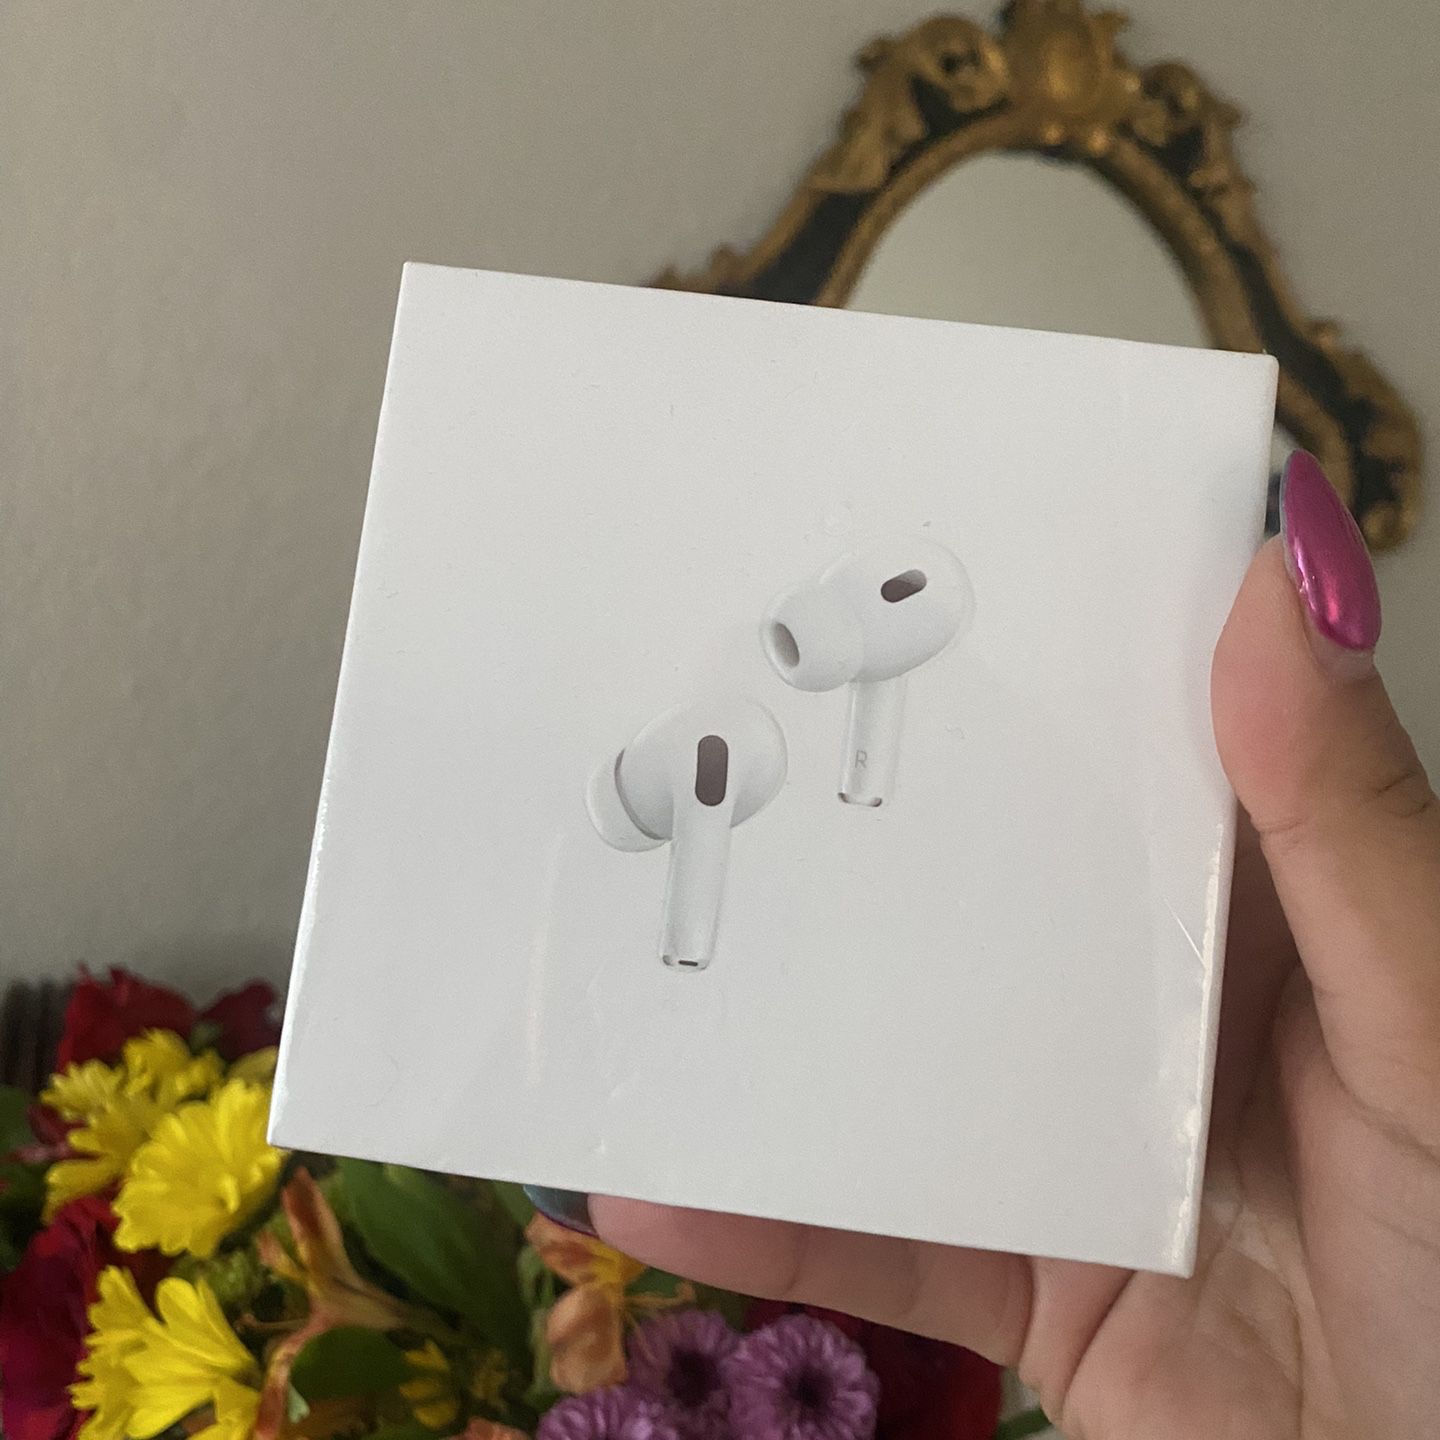 New AirPods Pro - Sealed